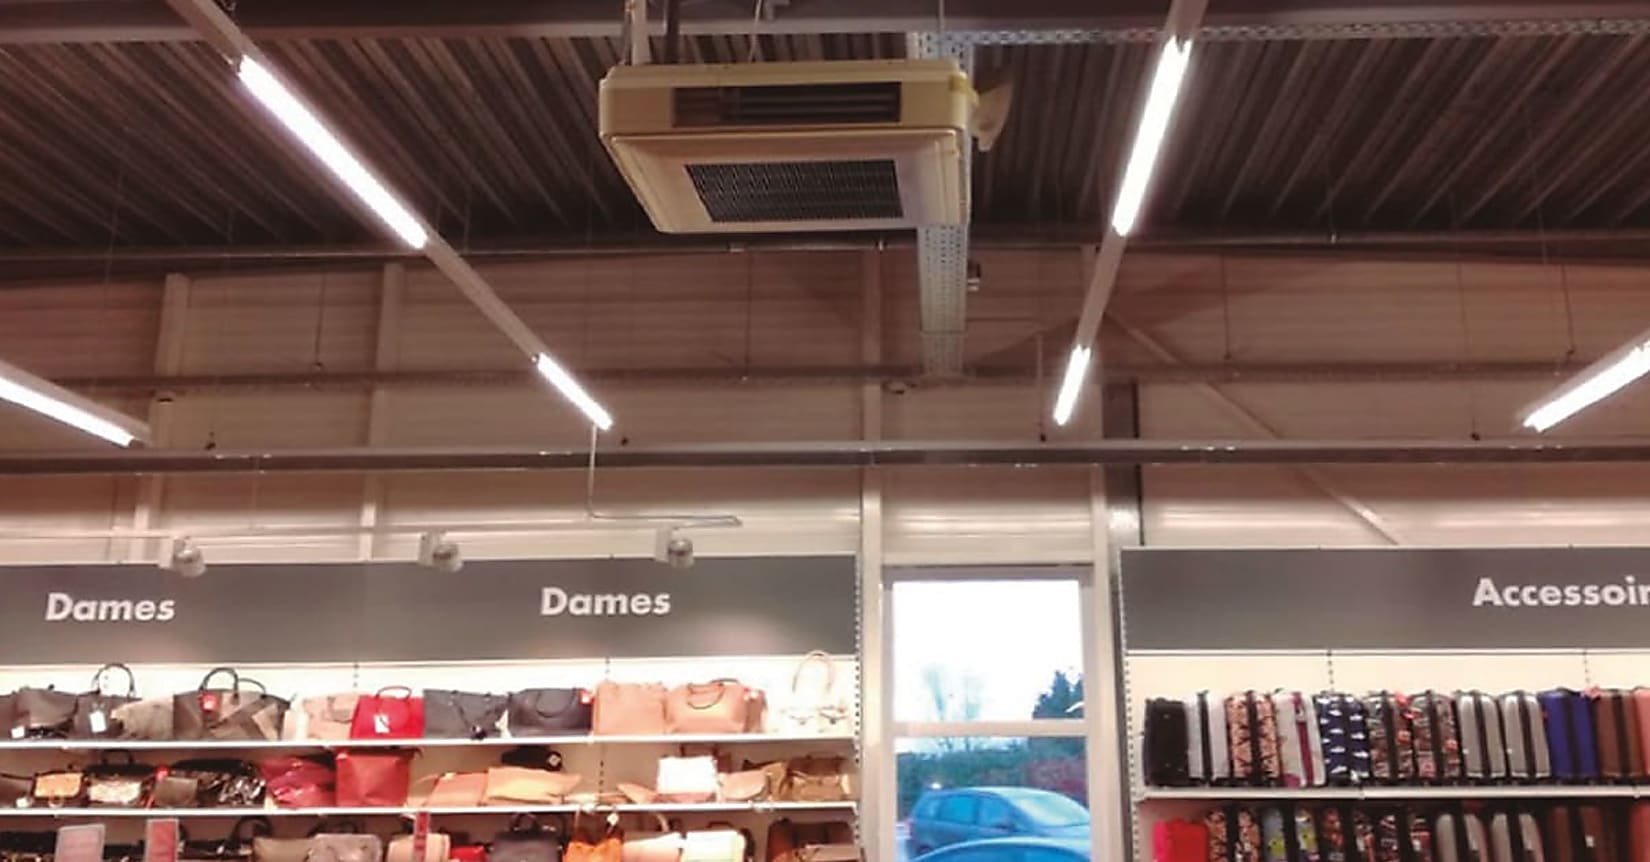 Remote HVAC control for retail sector and office buildings